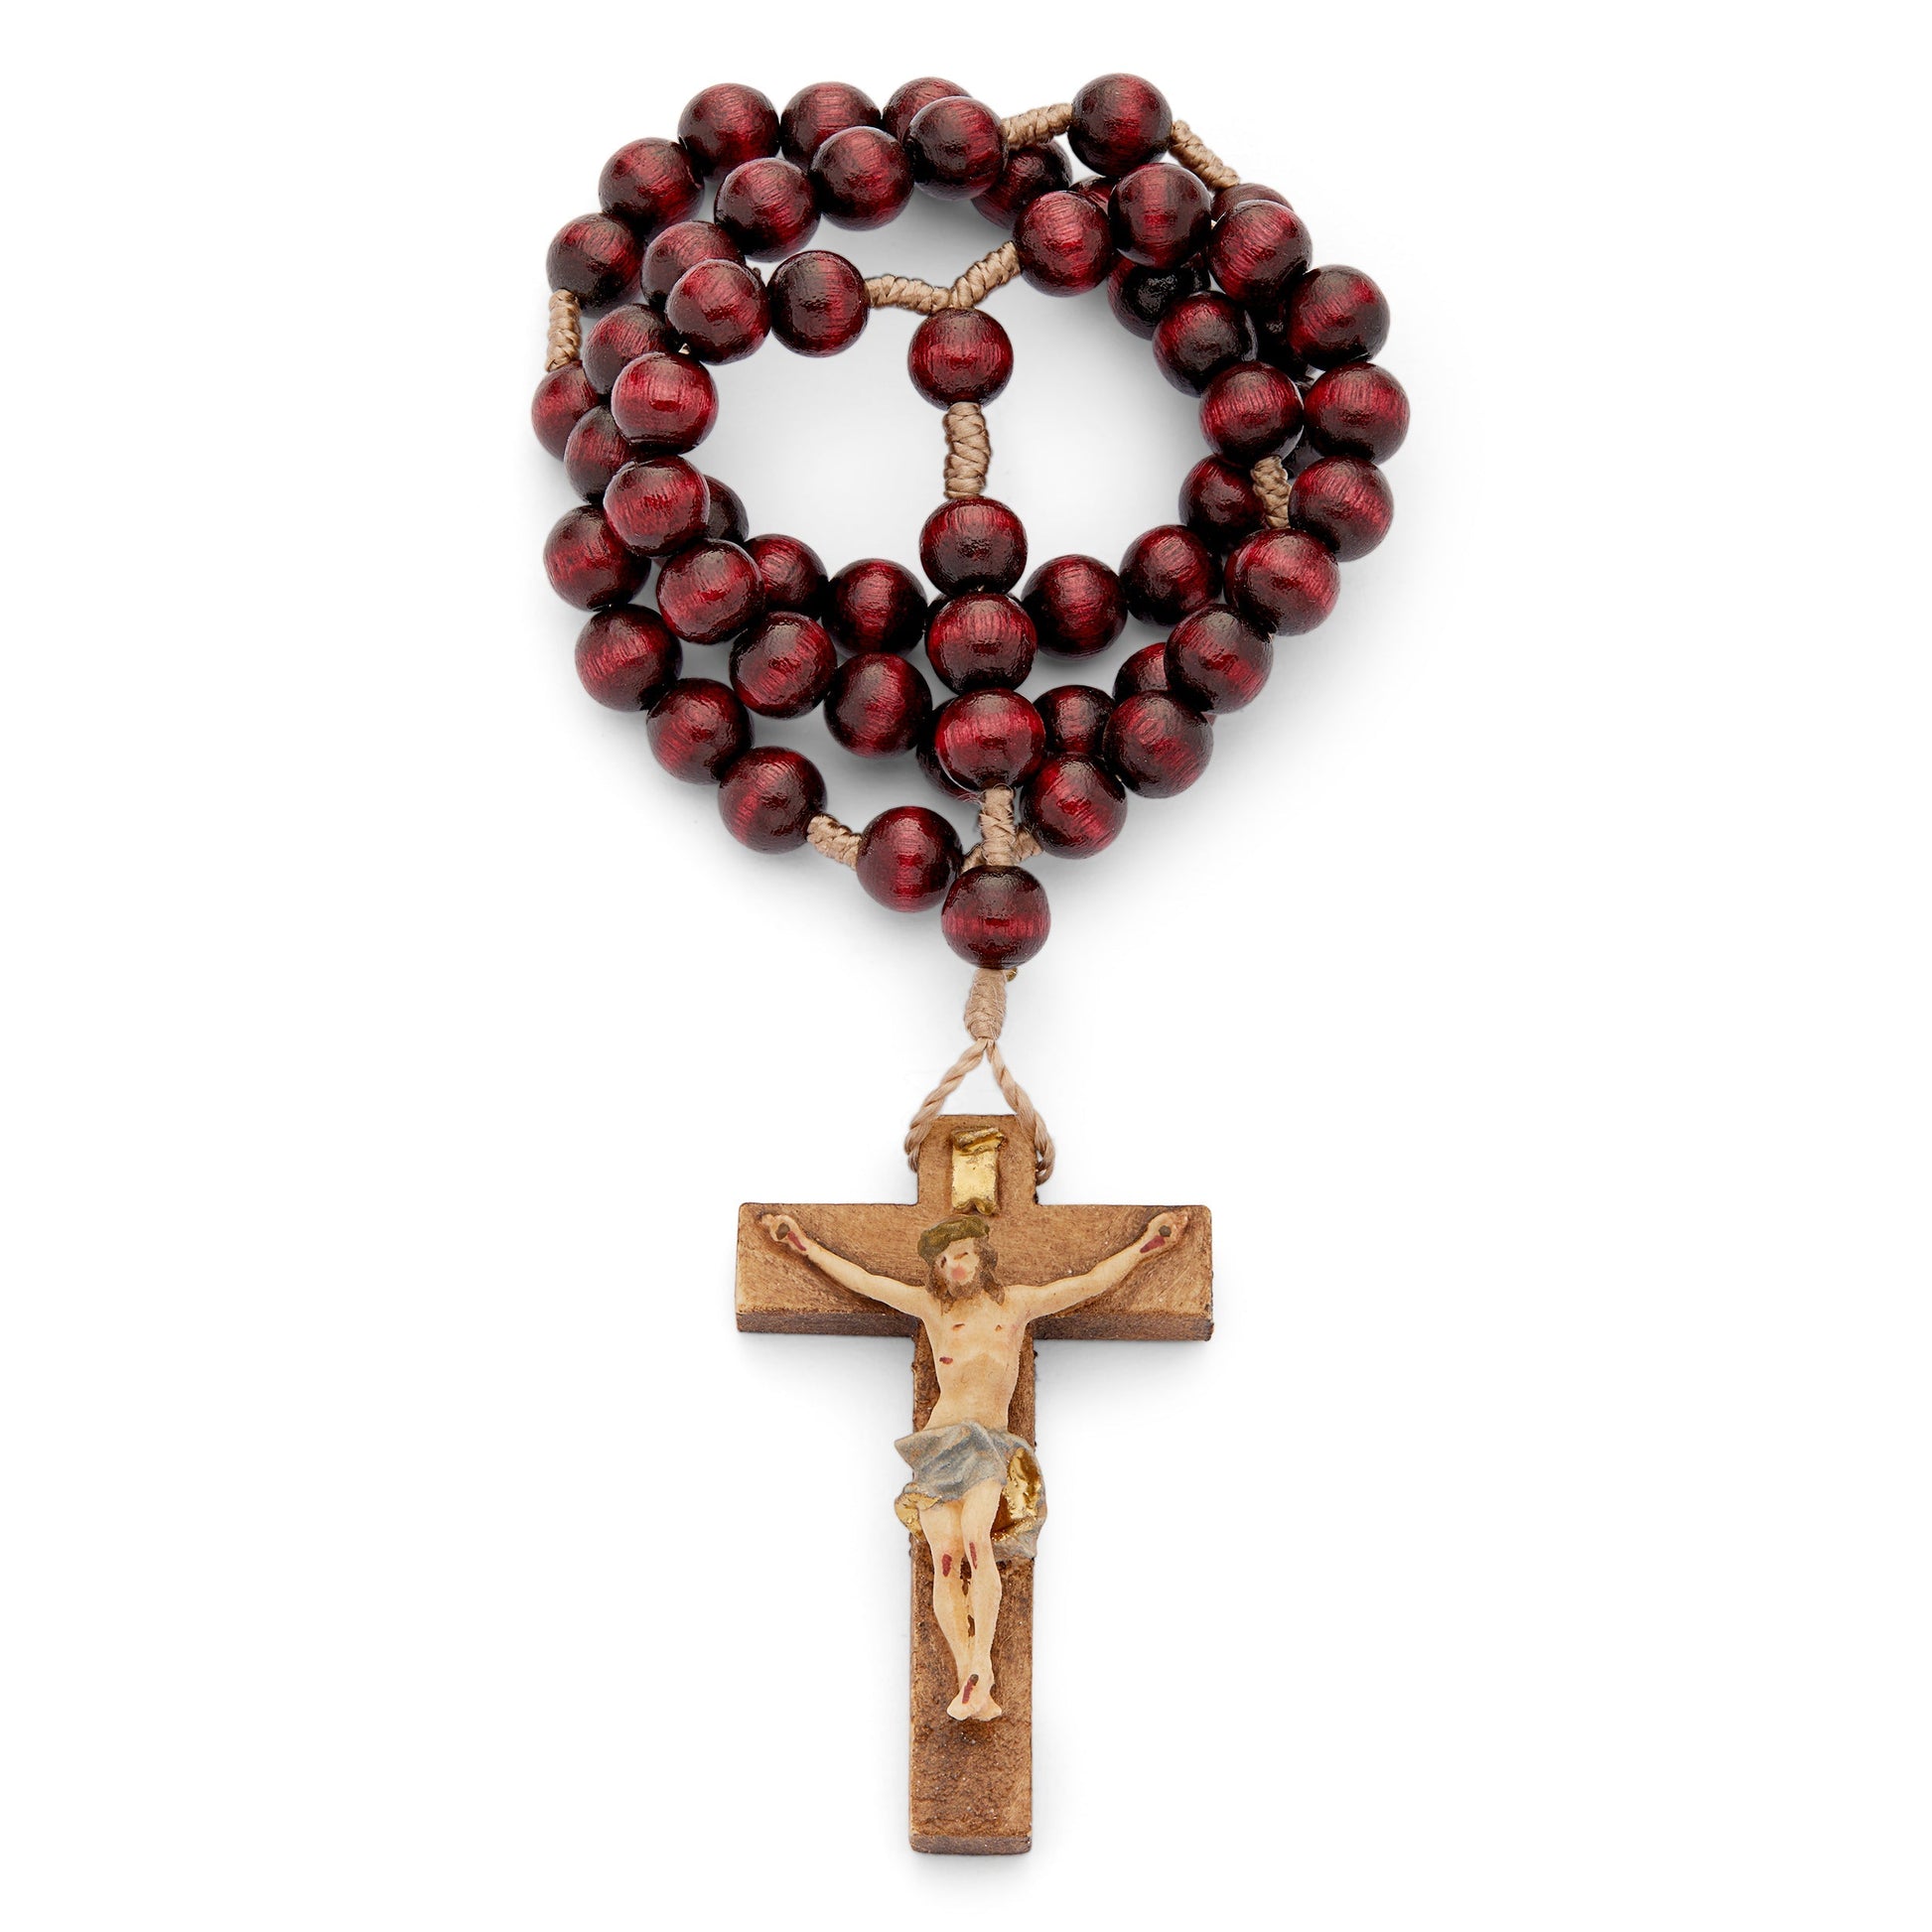 MONDO CATTOLICO Prayer Beads 34 cm (13.38 in) / 7 mm (0.27 in) Wooden Rosary in Rope with Handpainted Crucifix